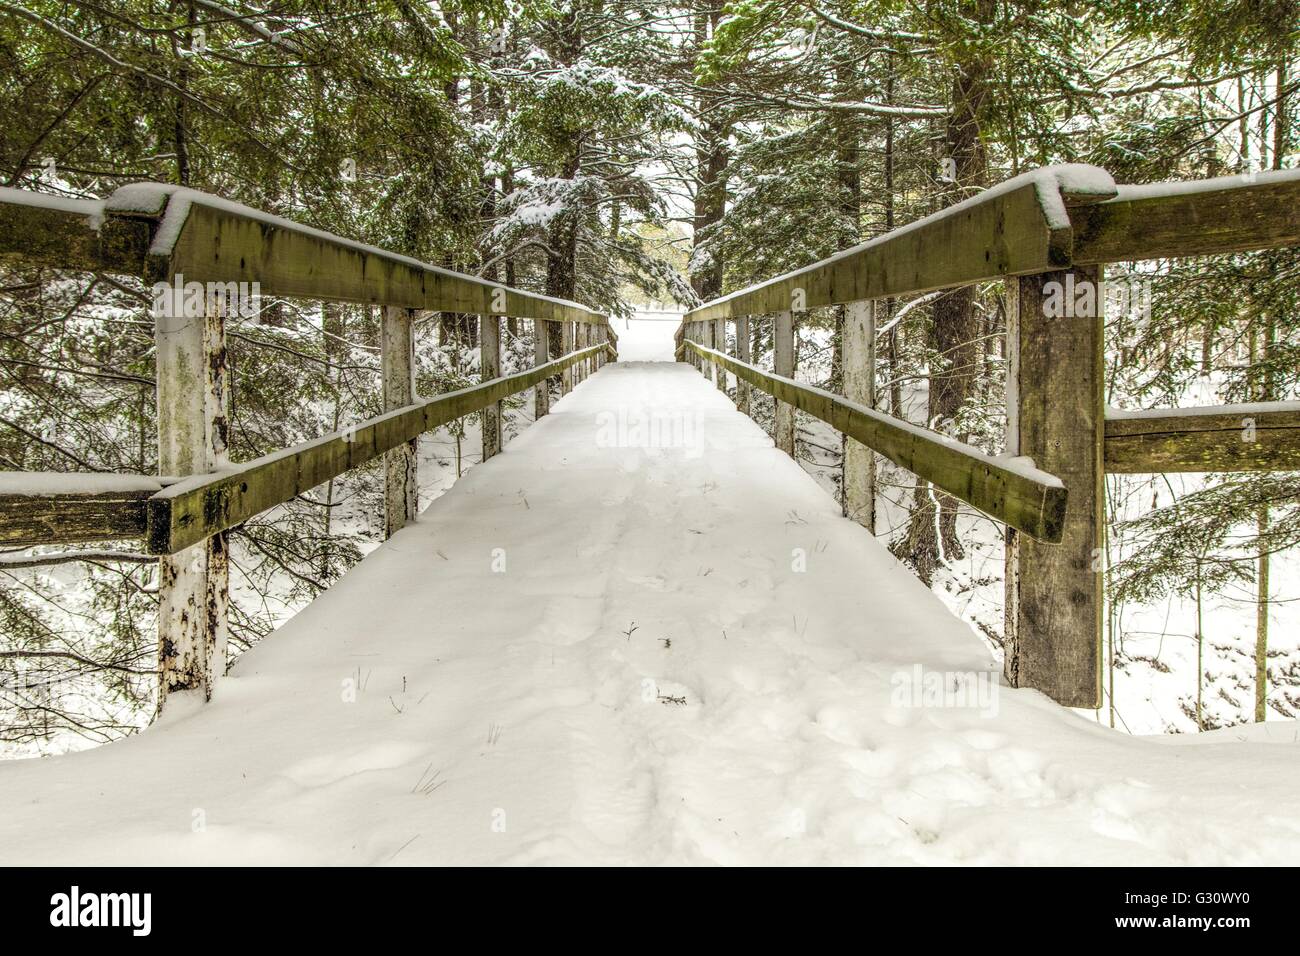 Winter Wonderland. Snow covered wooden bridge through the canopy of a winter forest. Stock Photo